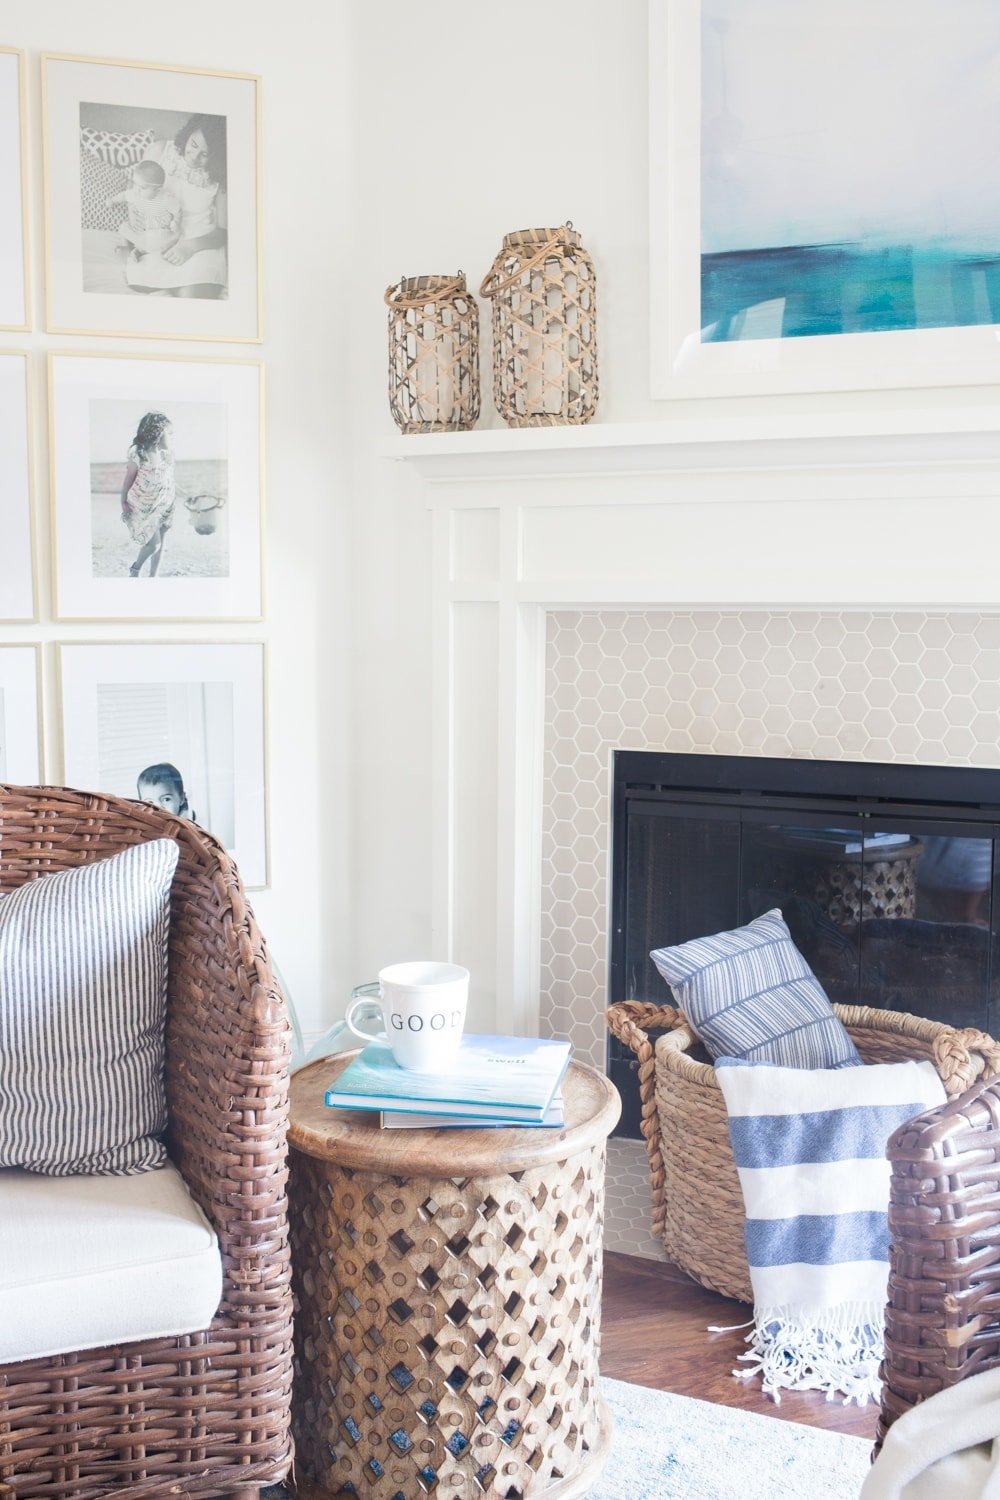 Coastal decor that's not nautical or too themed